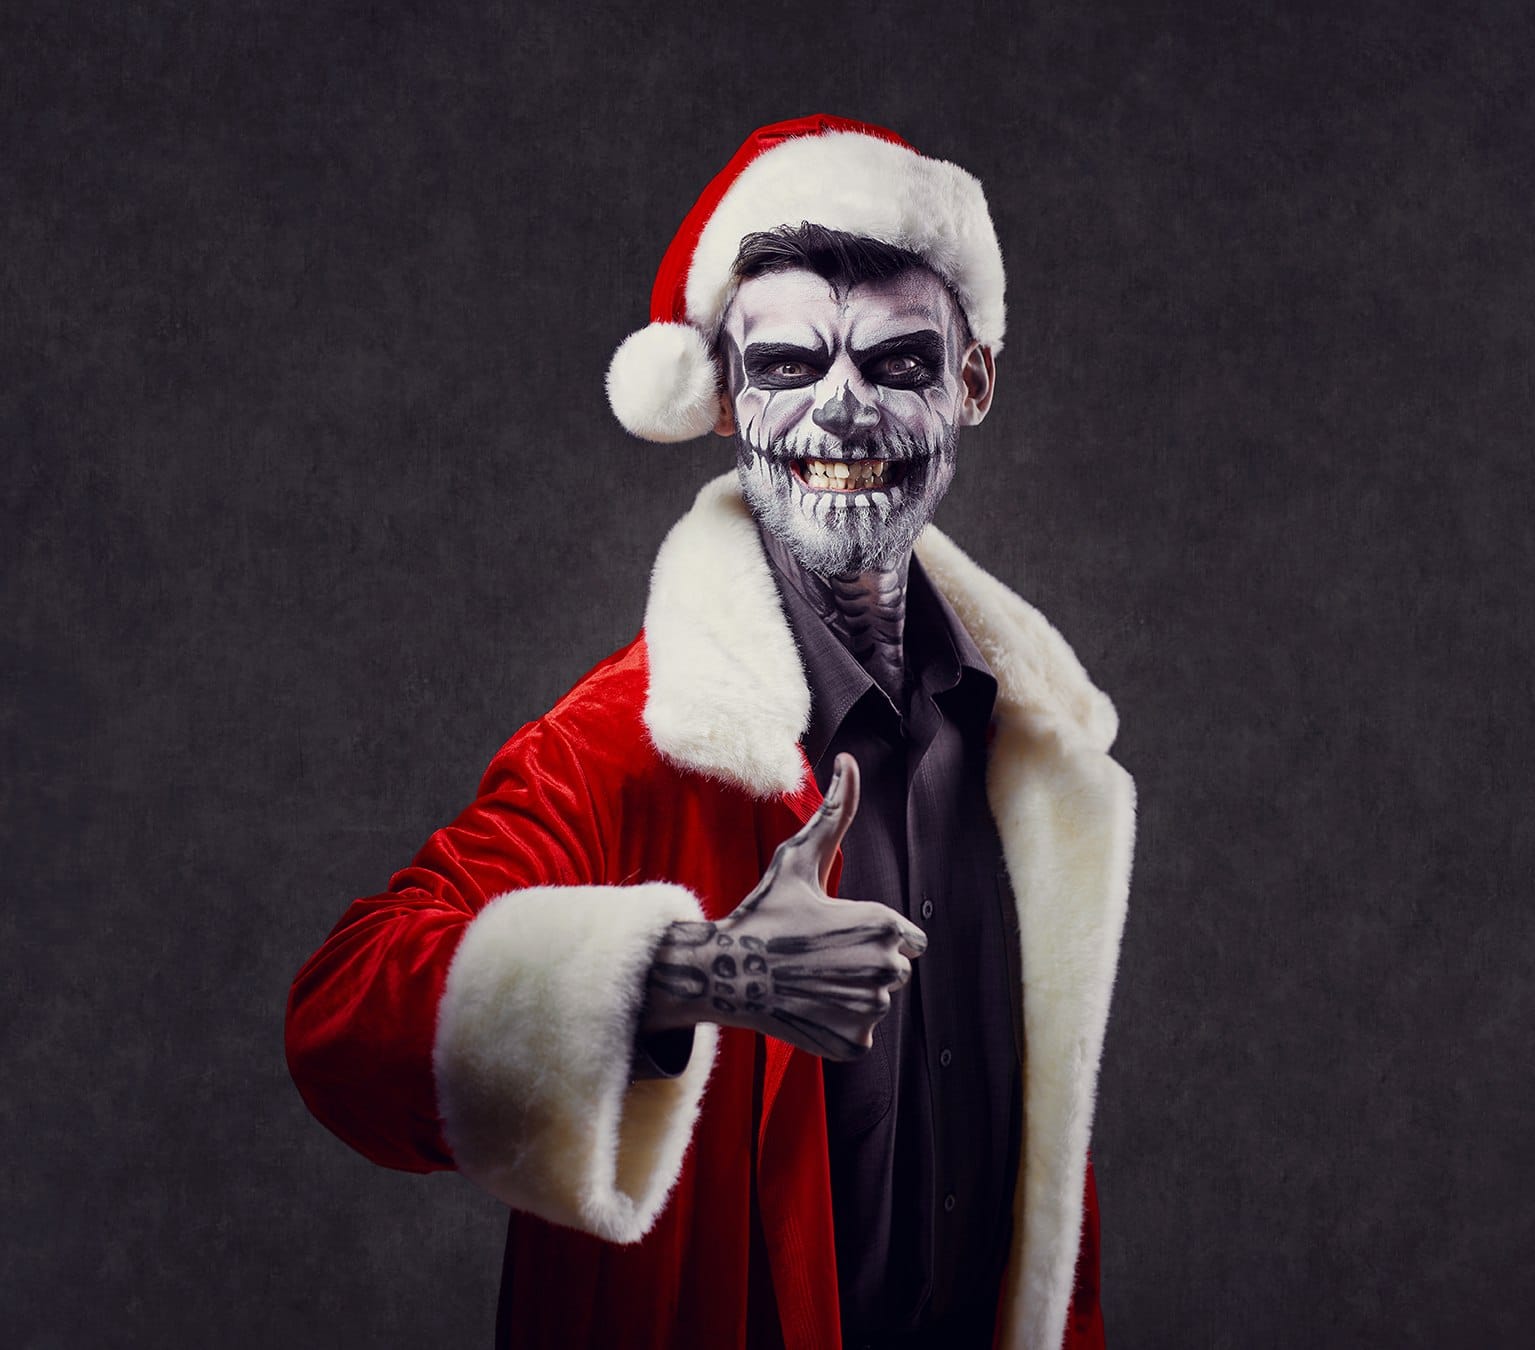 IoT Security: The Nightmare After Christmas